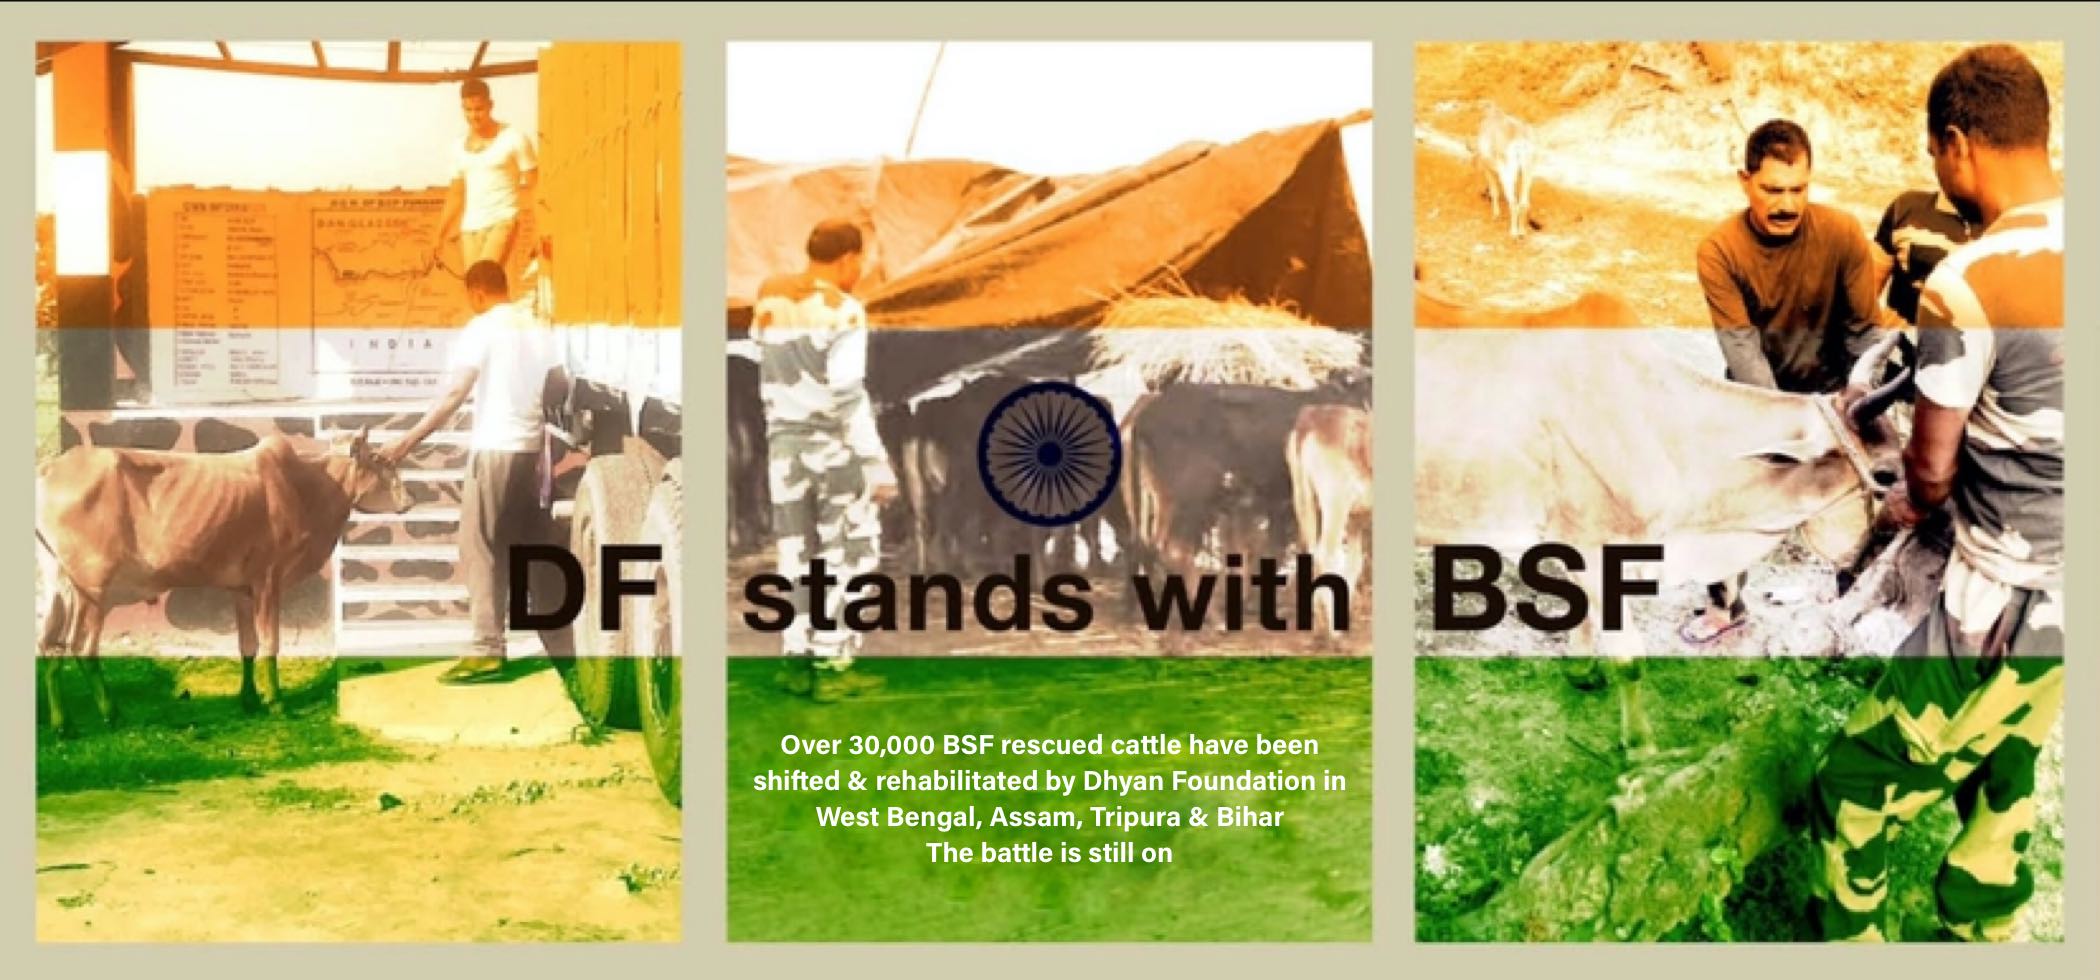 DF STANDS WITH BSF